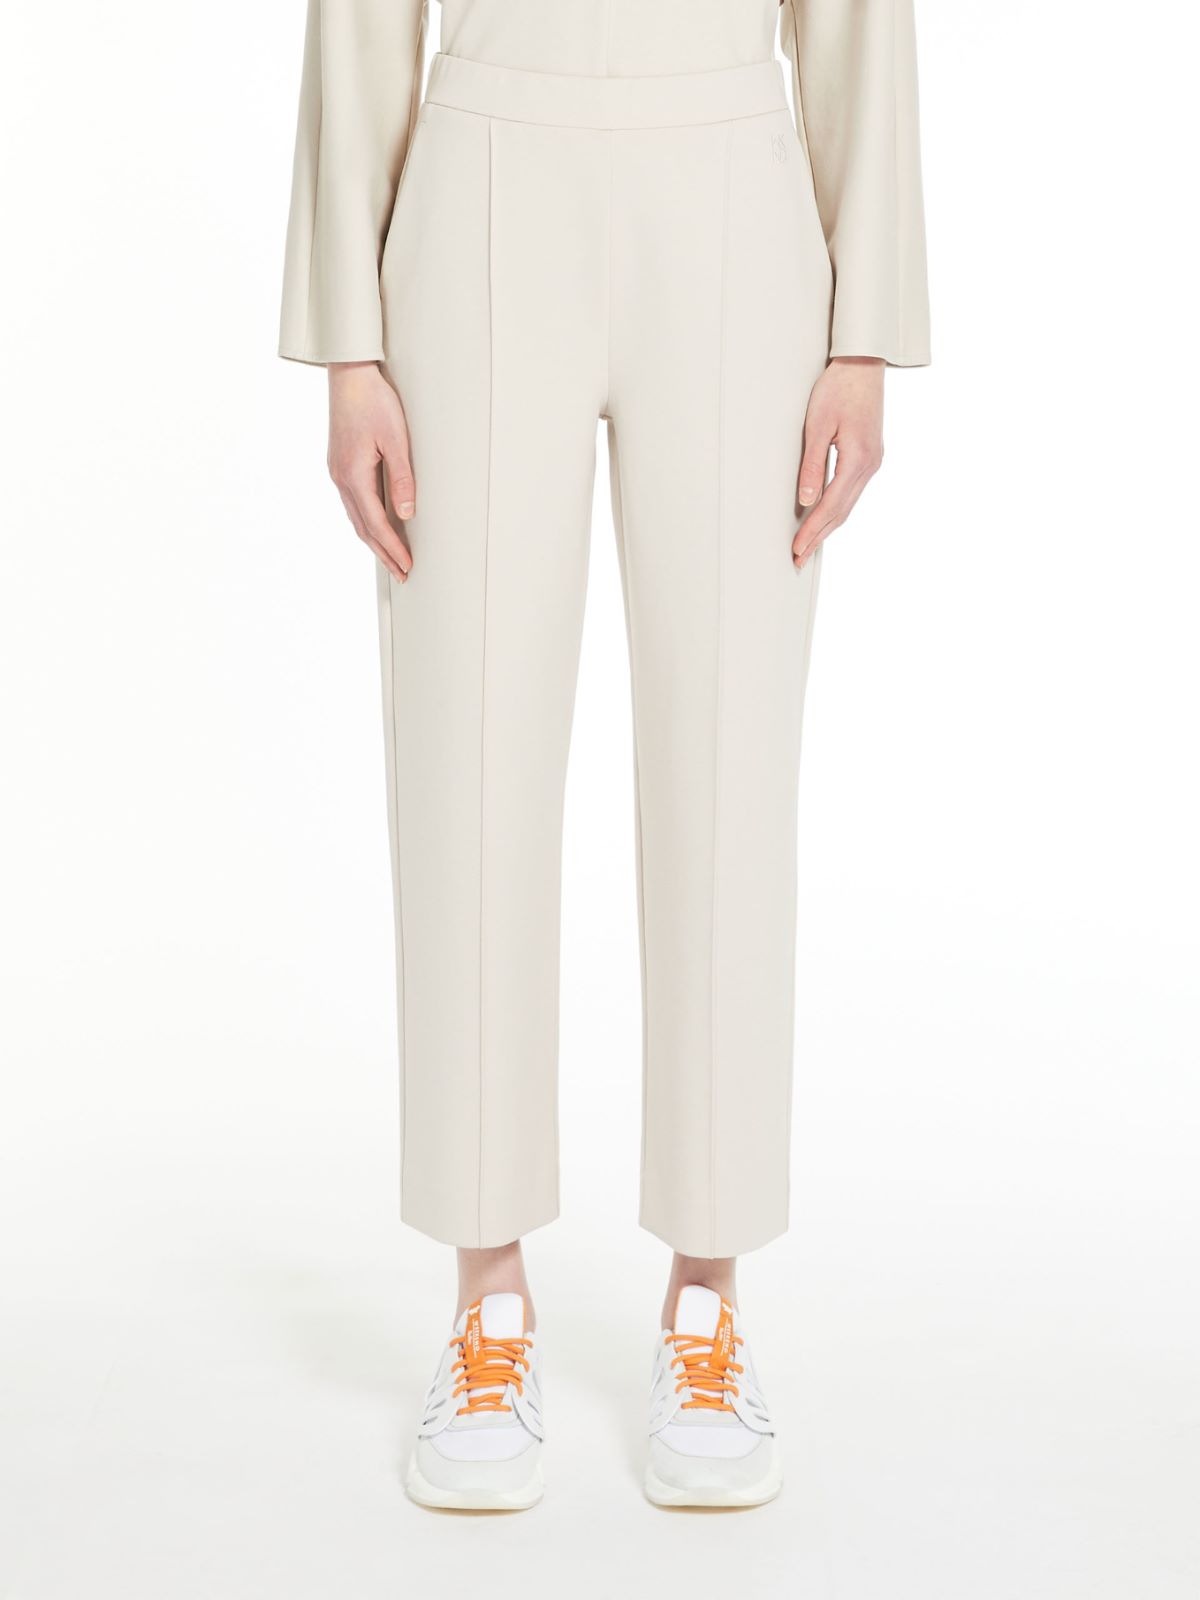 Jersey trousers - SAND - Weekend Max Mara - 2